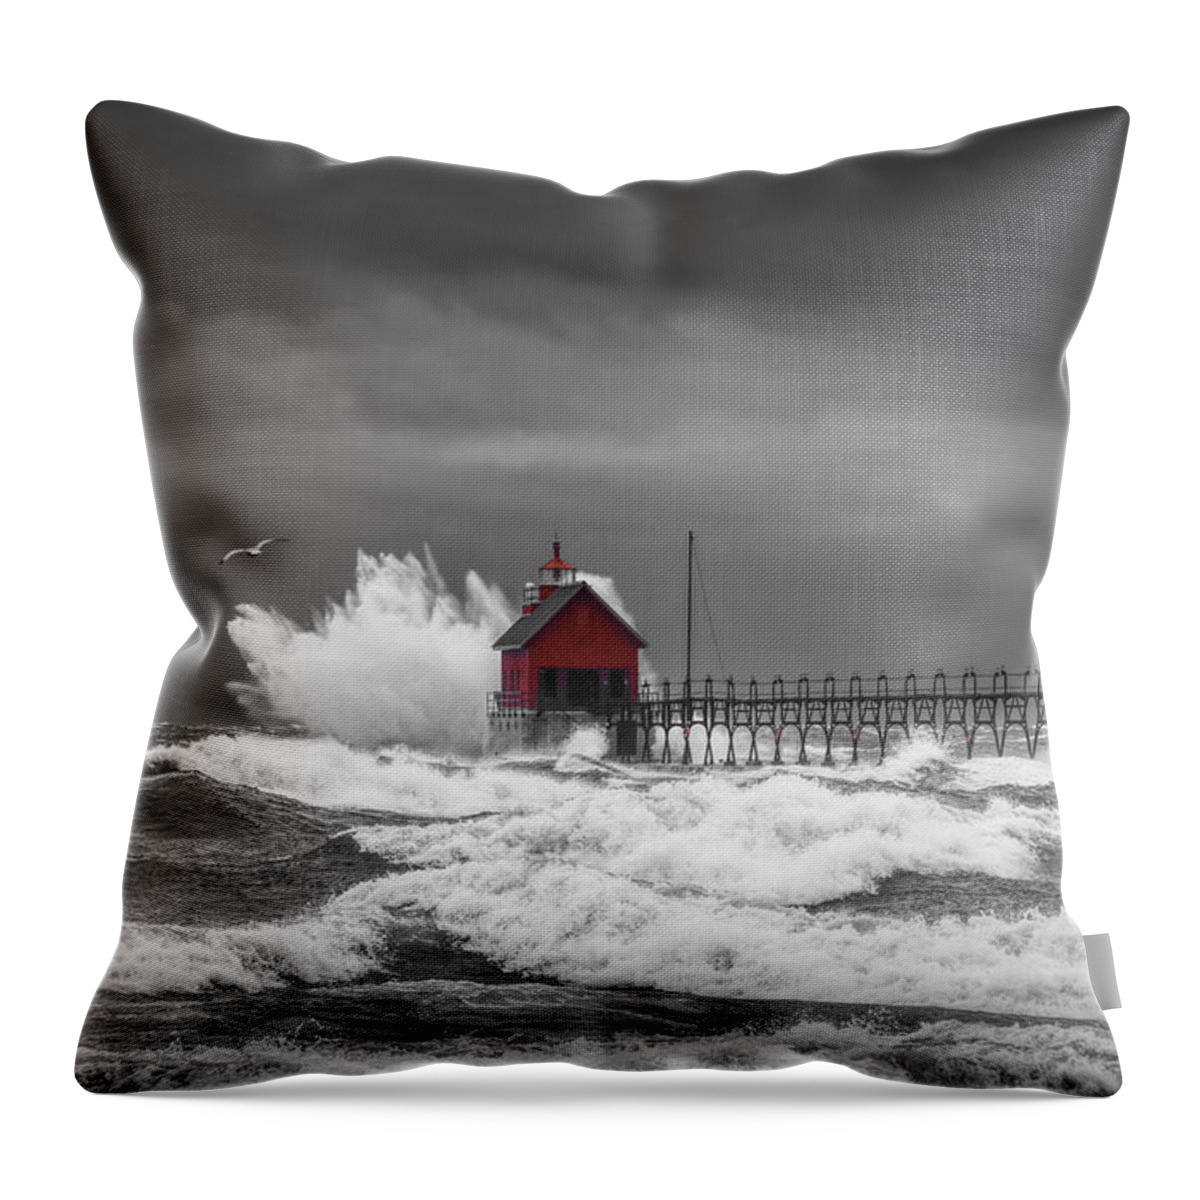 Lighthouse Throw Pillow featuring the photograph November Storm with Flying Gull by the Grand Haven Lighthouse by Randall Nyhof